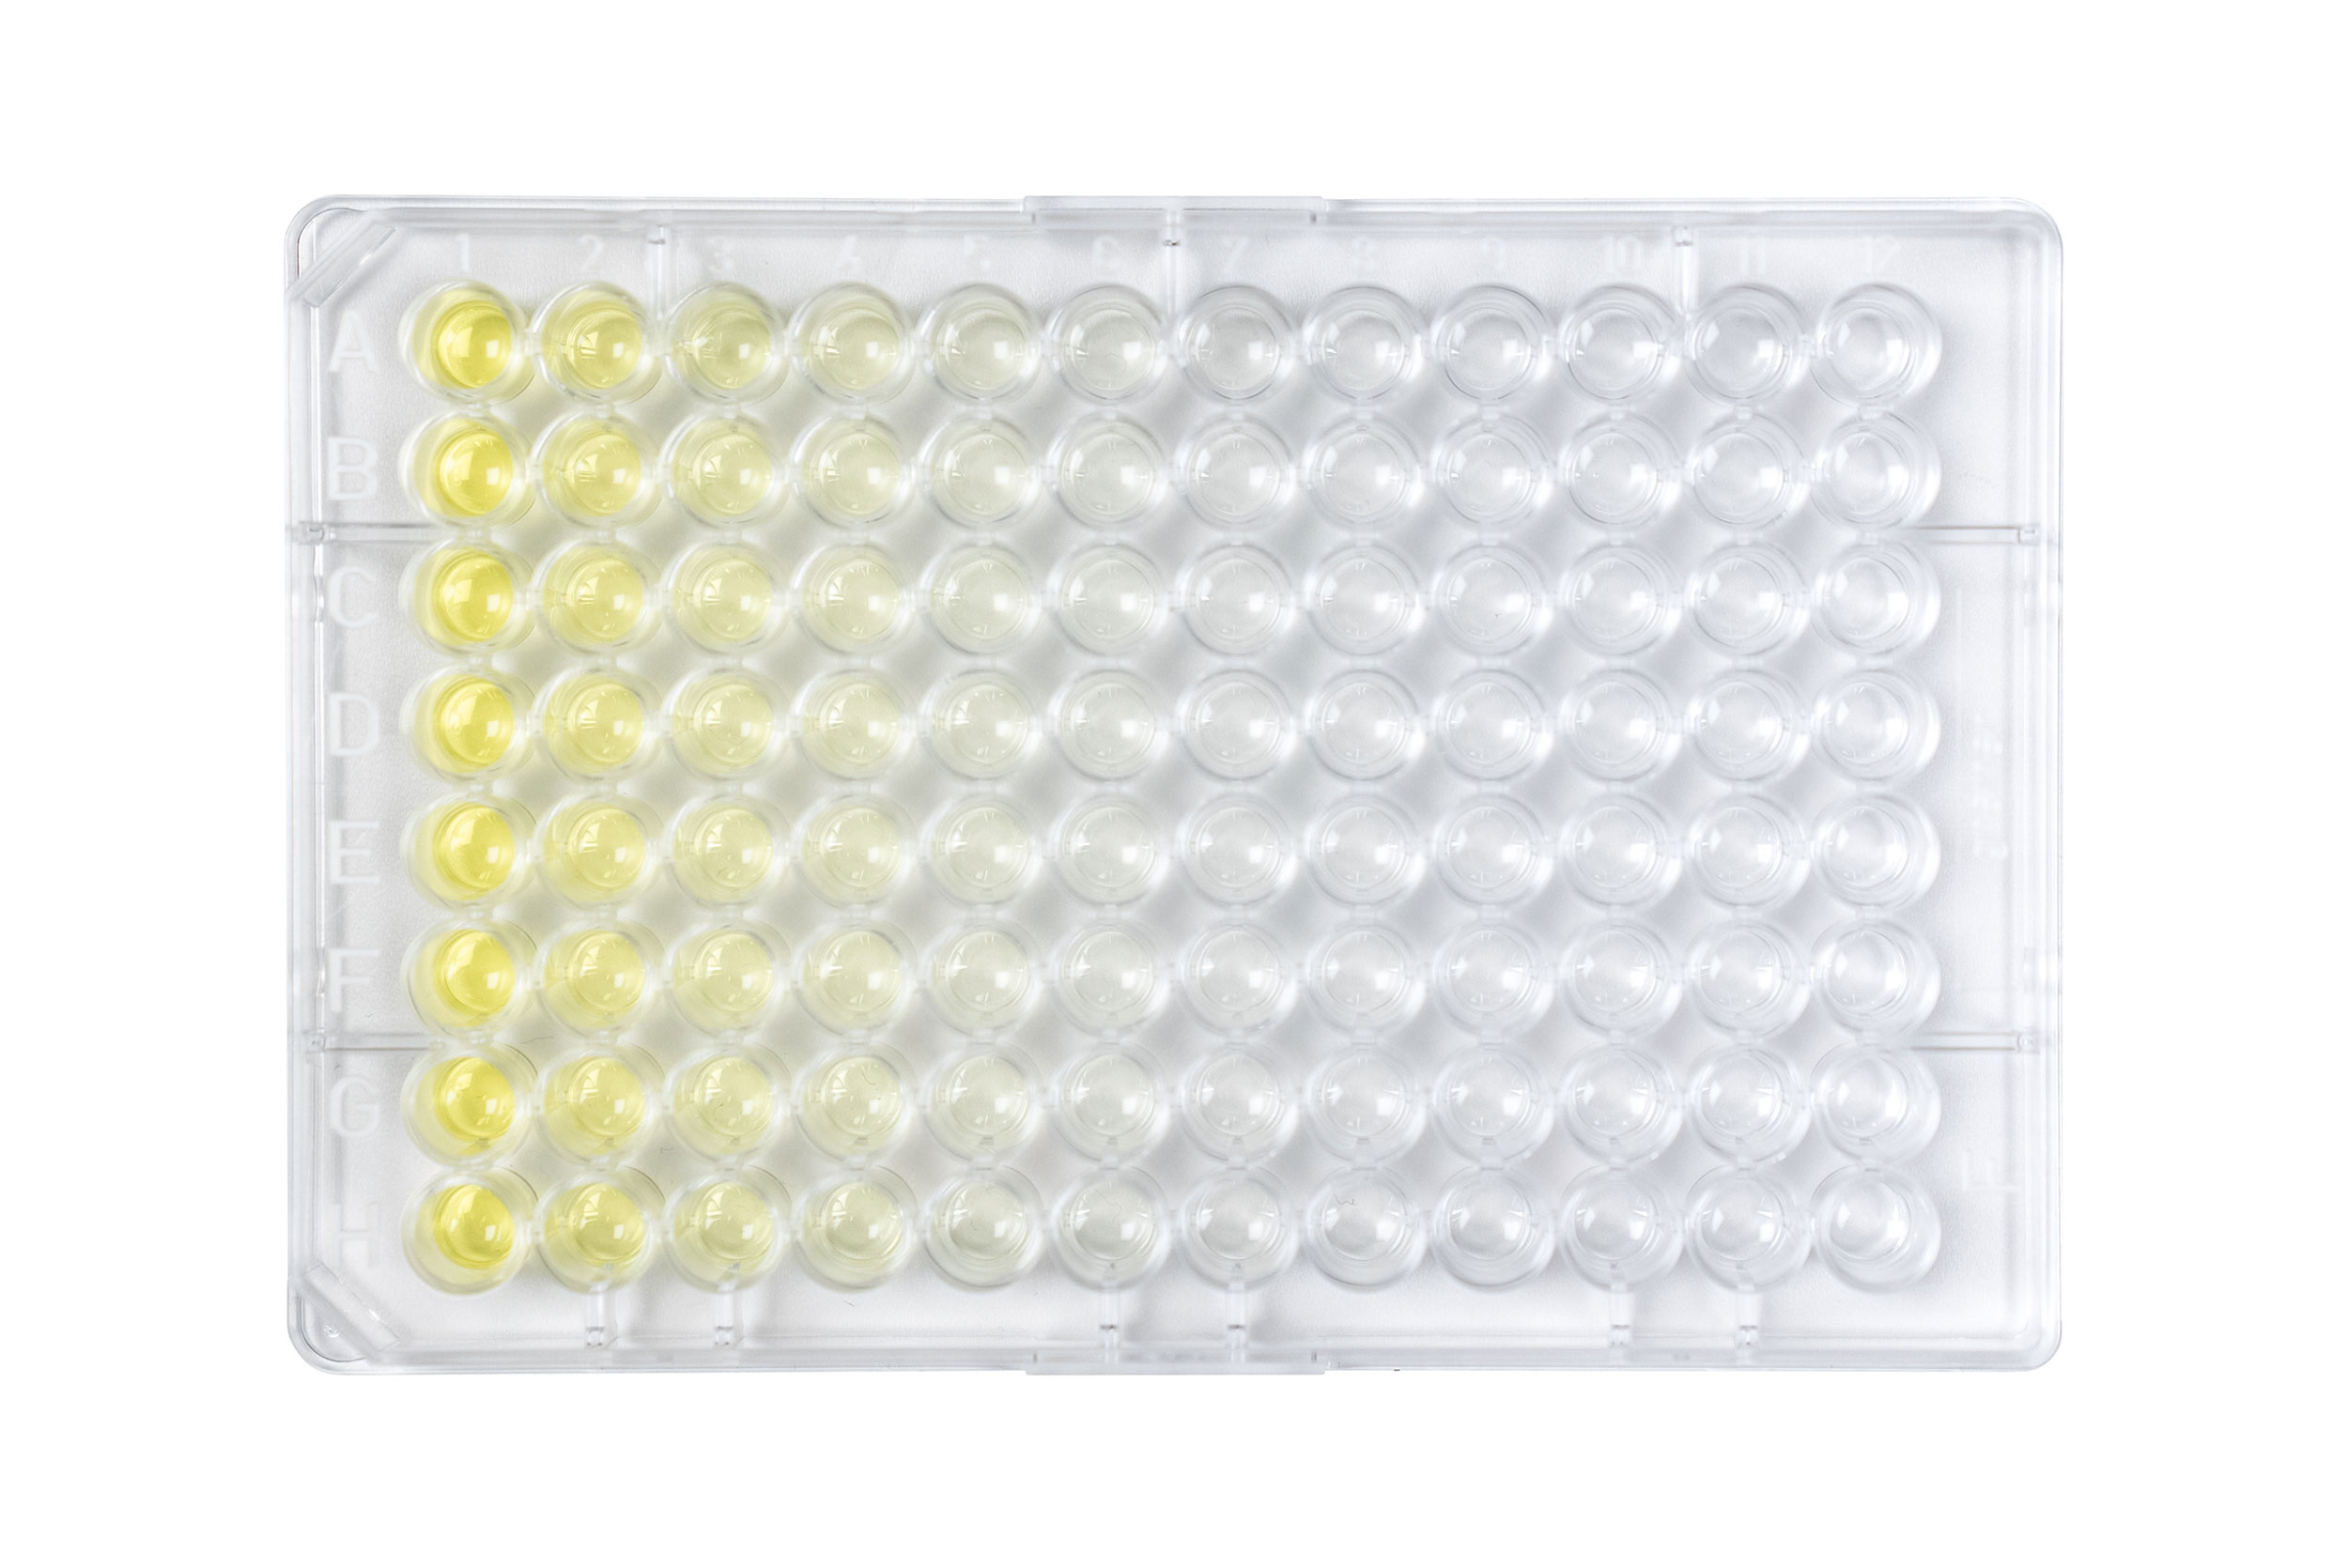 A 96 well flat-bottom plate with a finished 2-fold serial dilution of tartrazine.